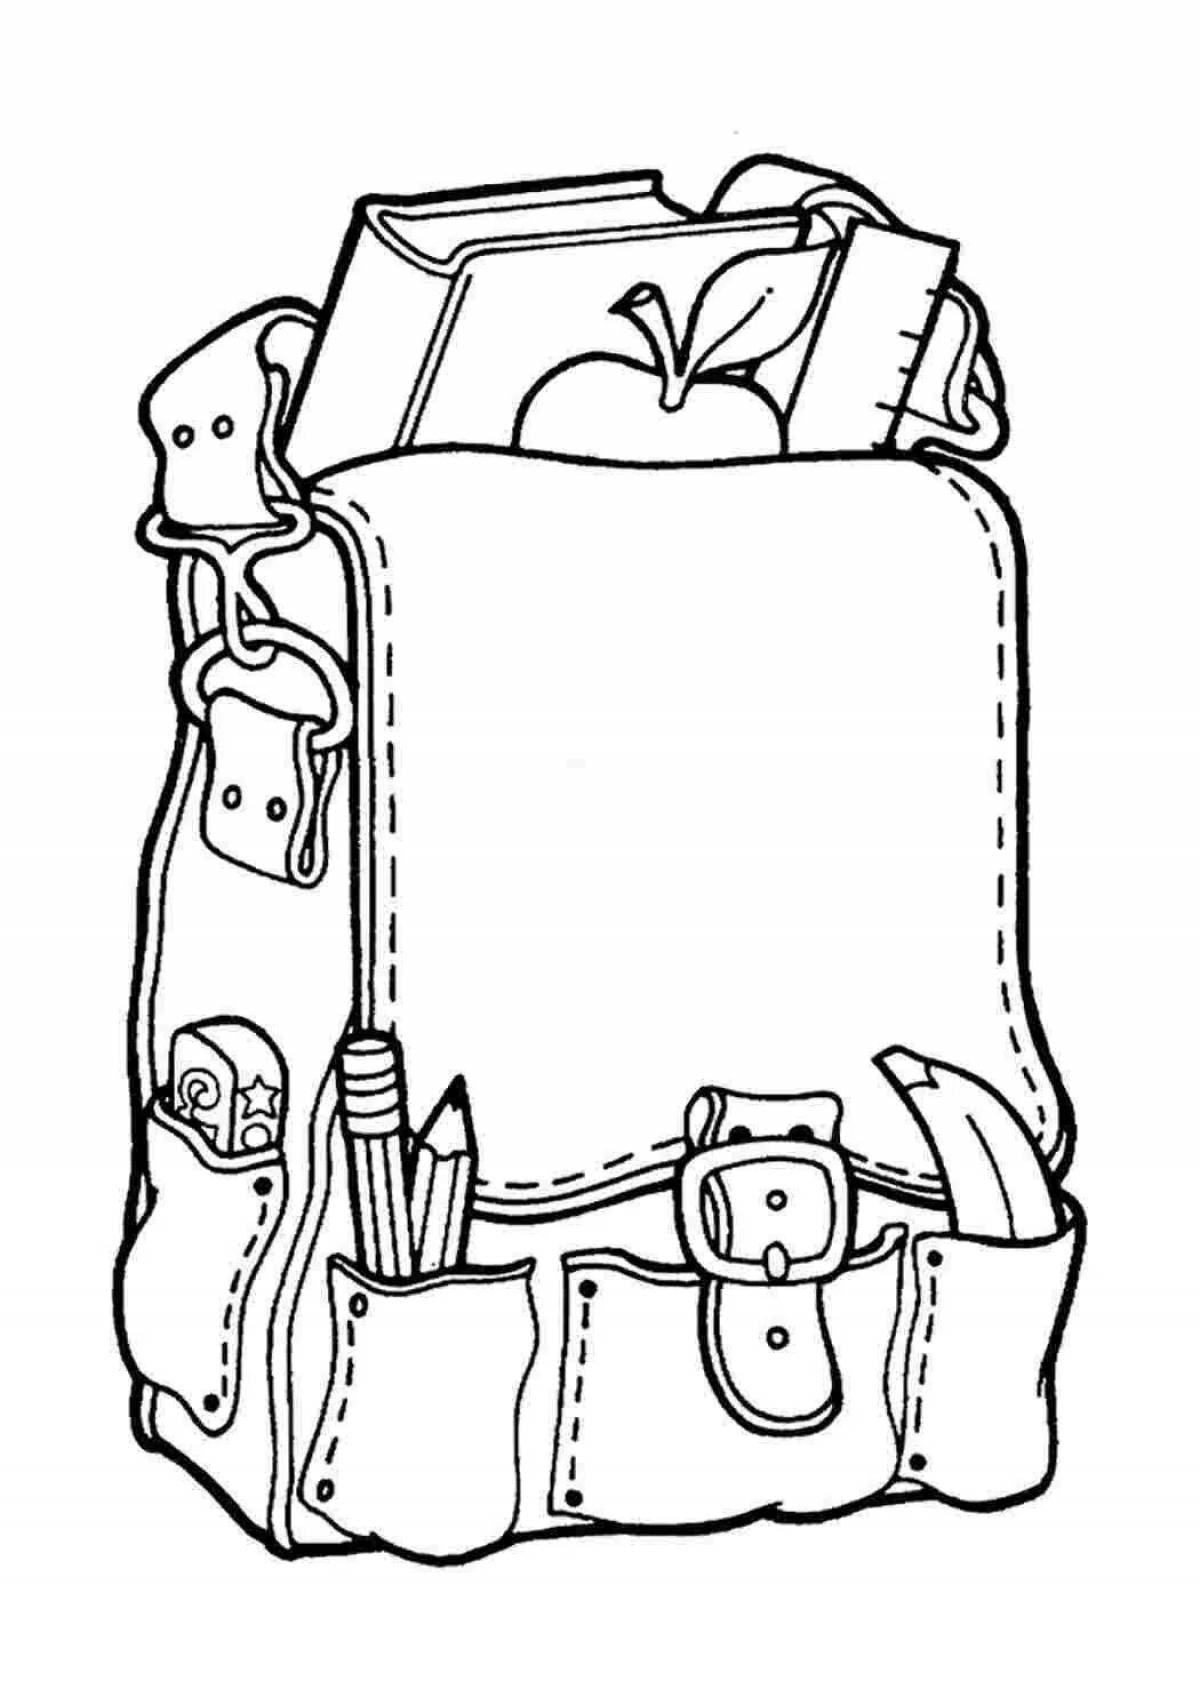 Awesome school bag coloring page